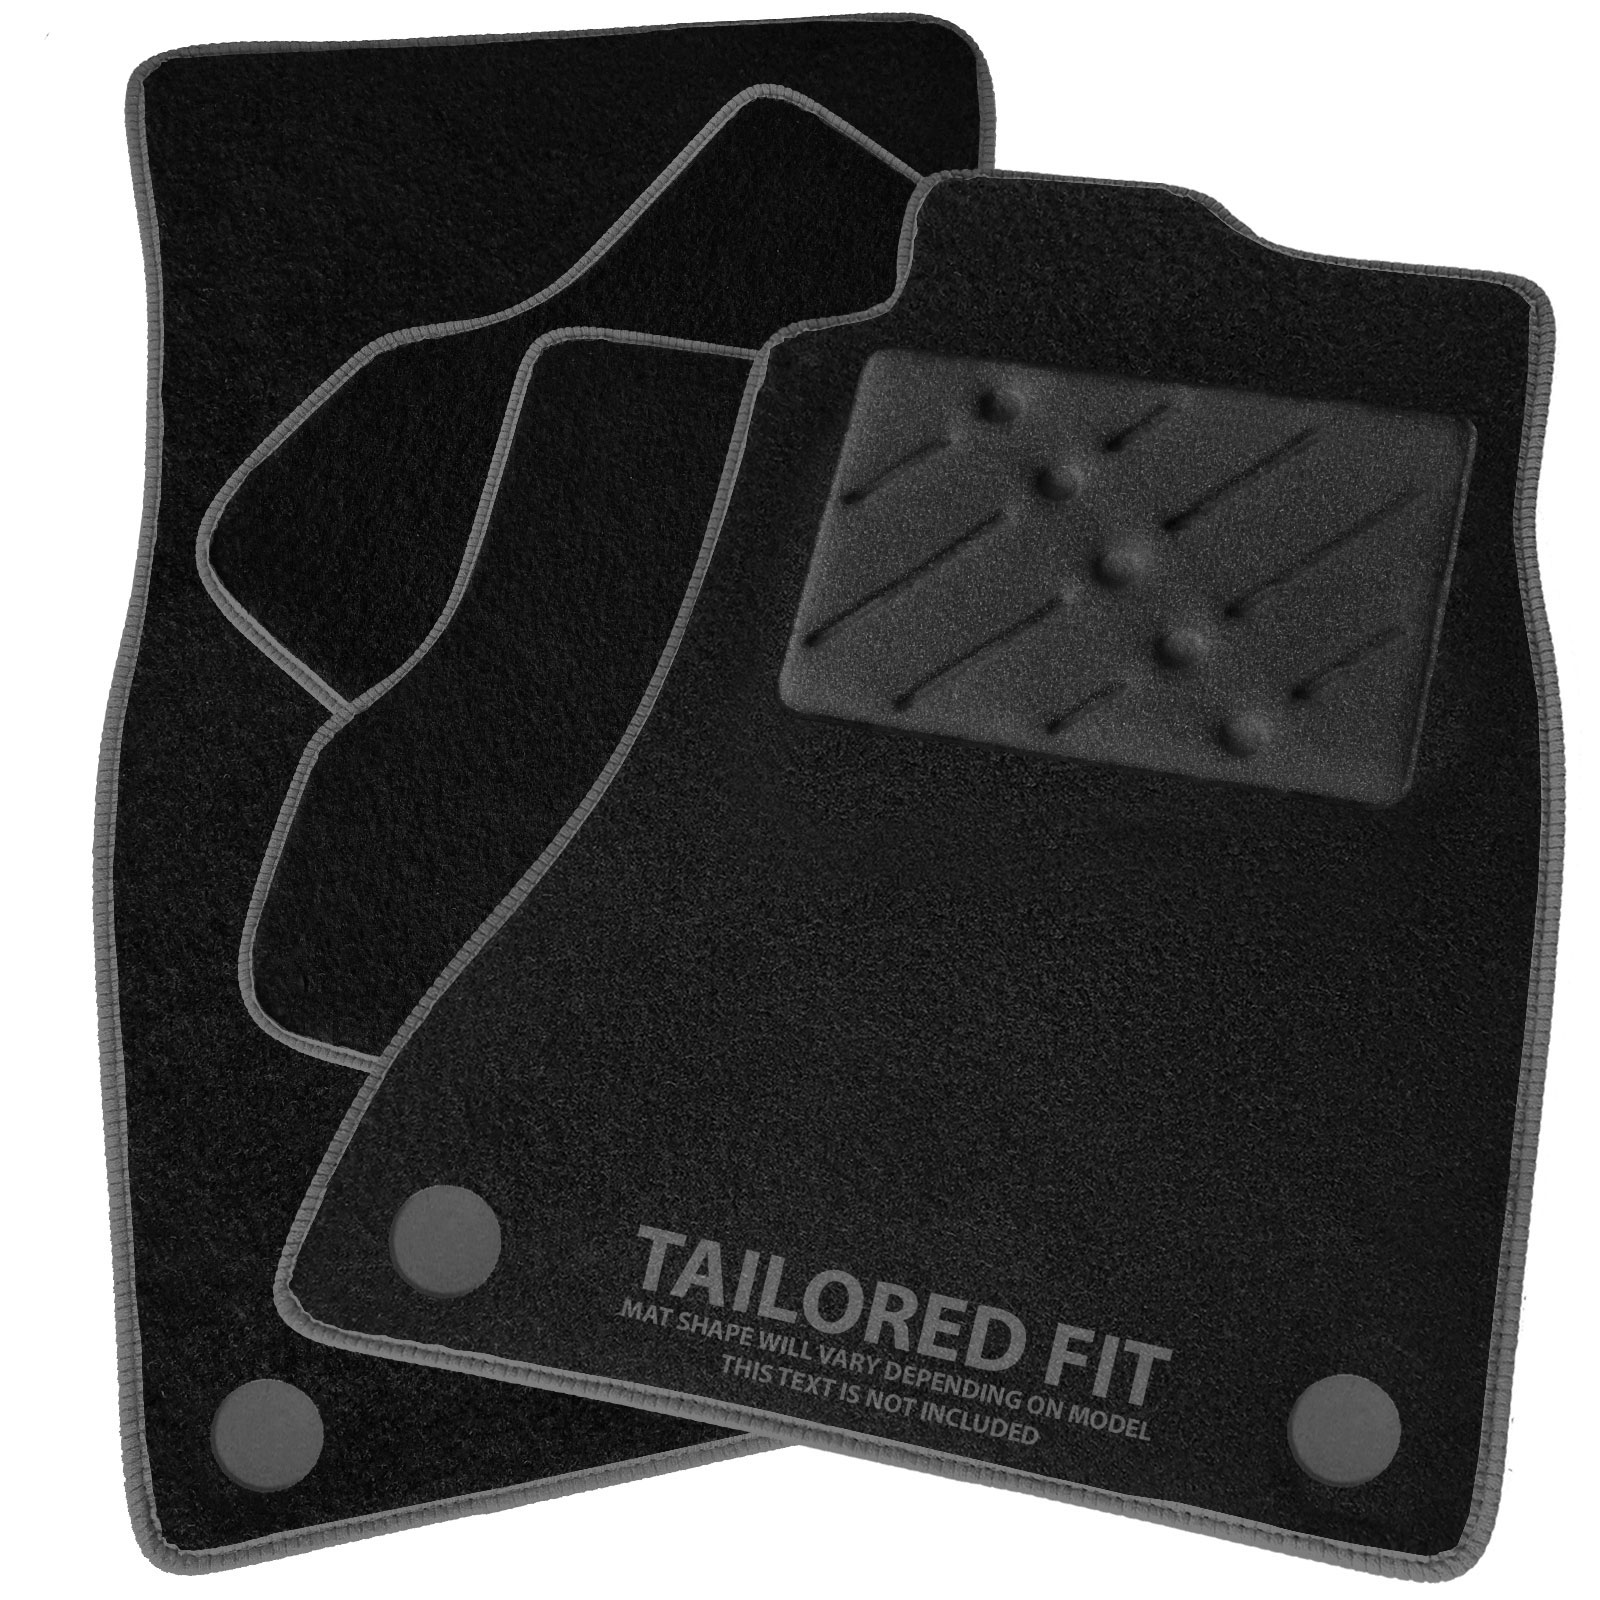 To fit Ford Focus MK2 2005-2011 Black Tailored Car Mats [BRWE]